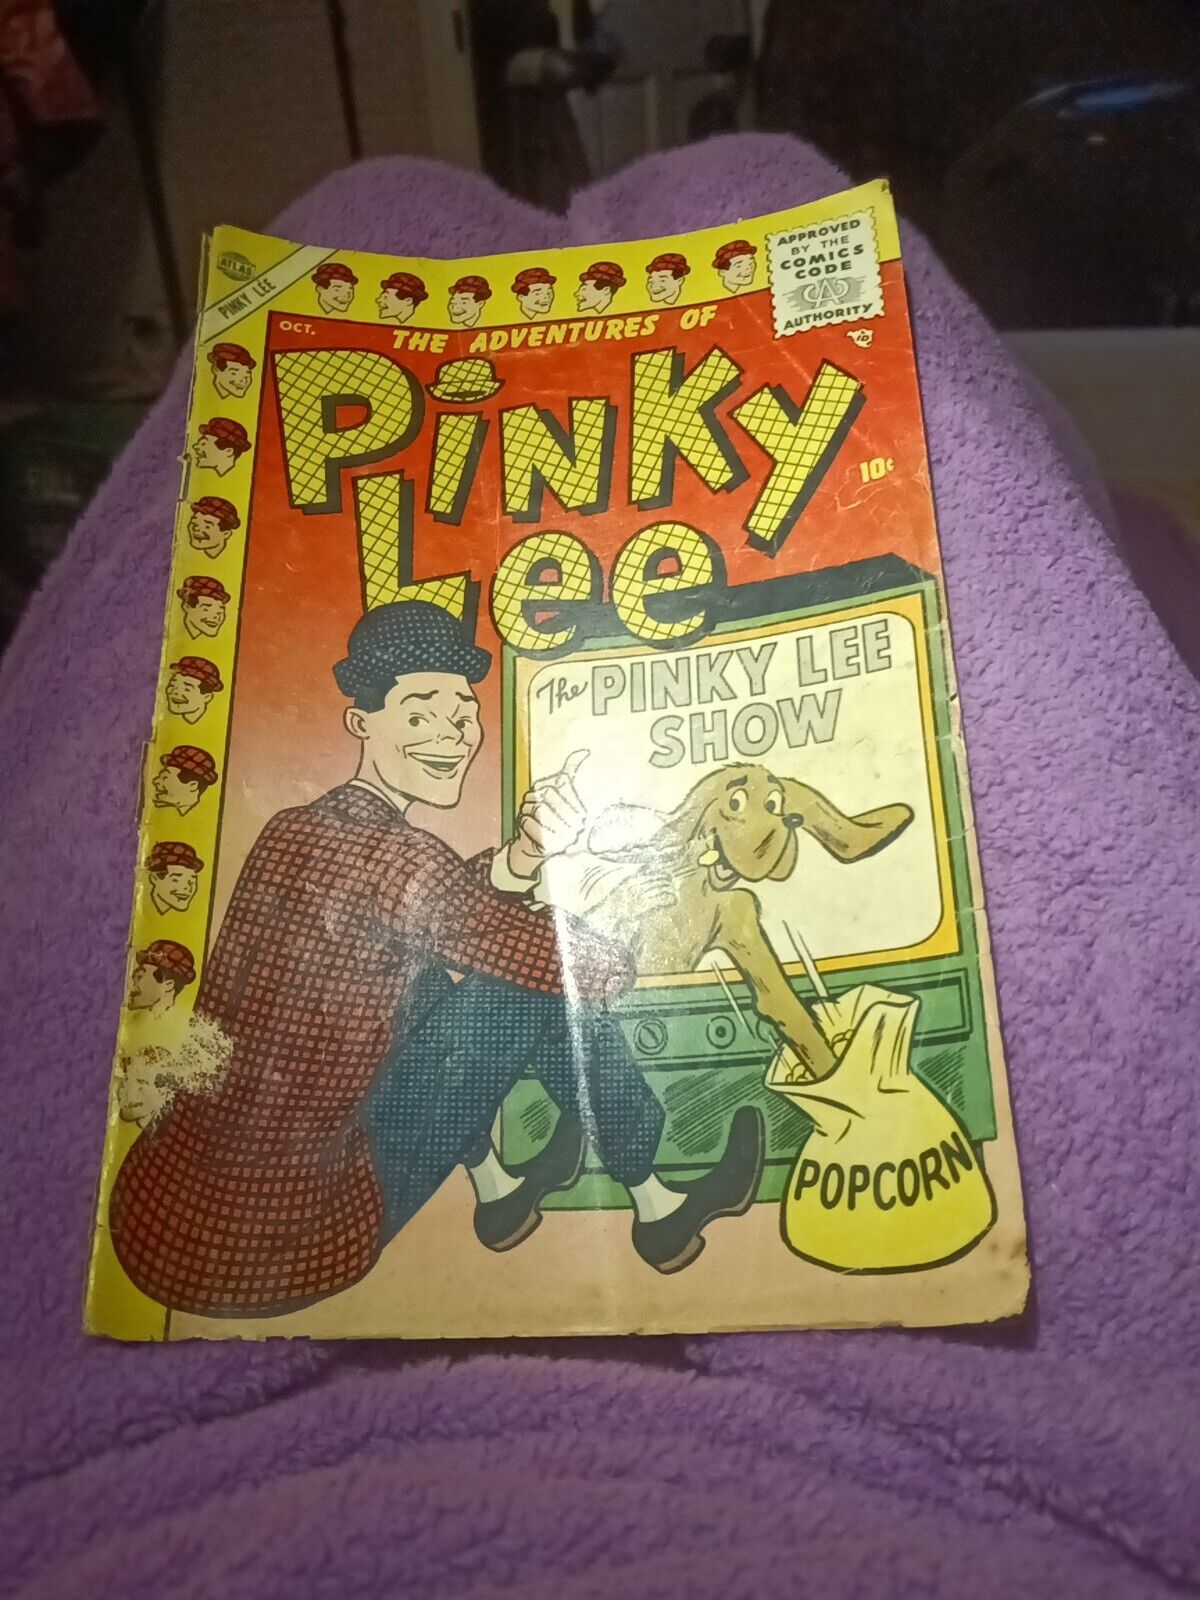 The Adventures of Pinky Lee #4 1955 Silver Age TV Set cover Atlas Comics Show 